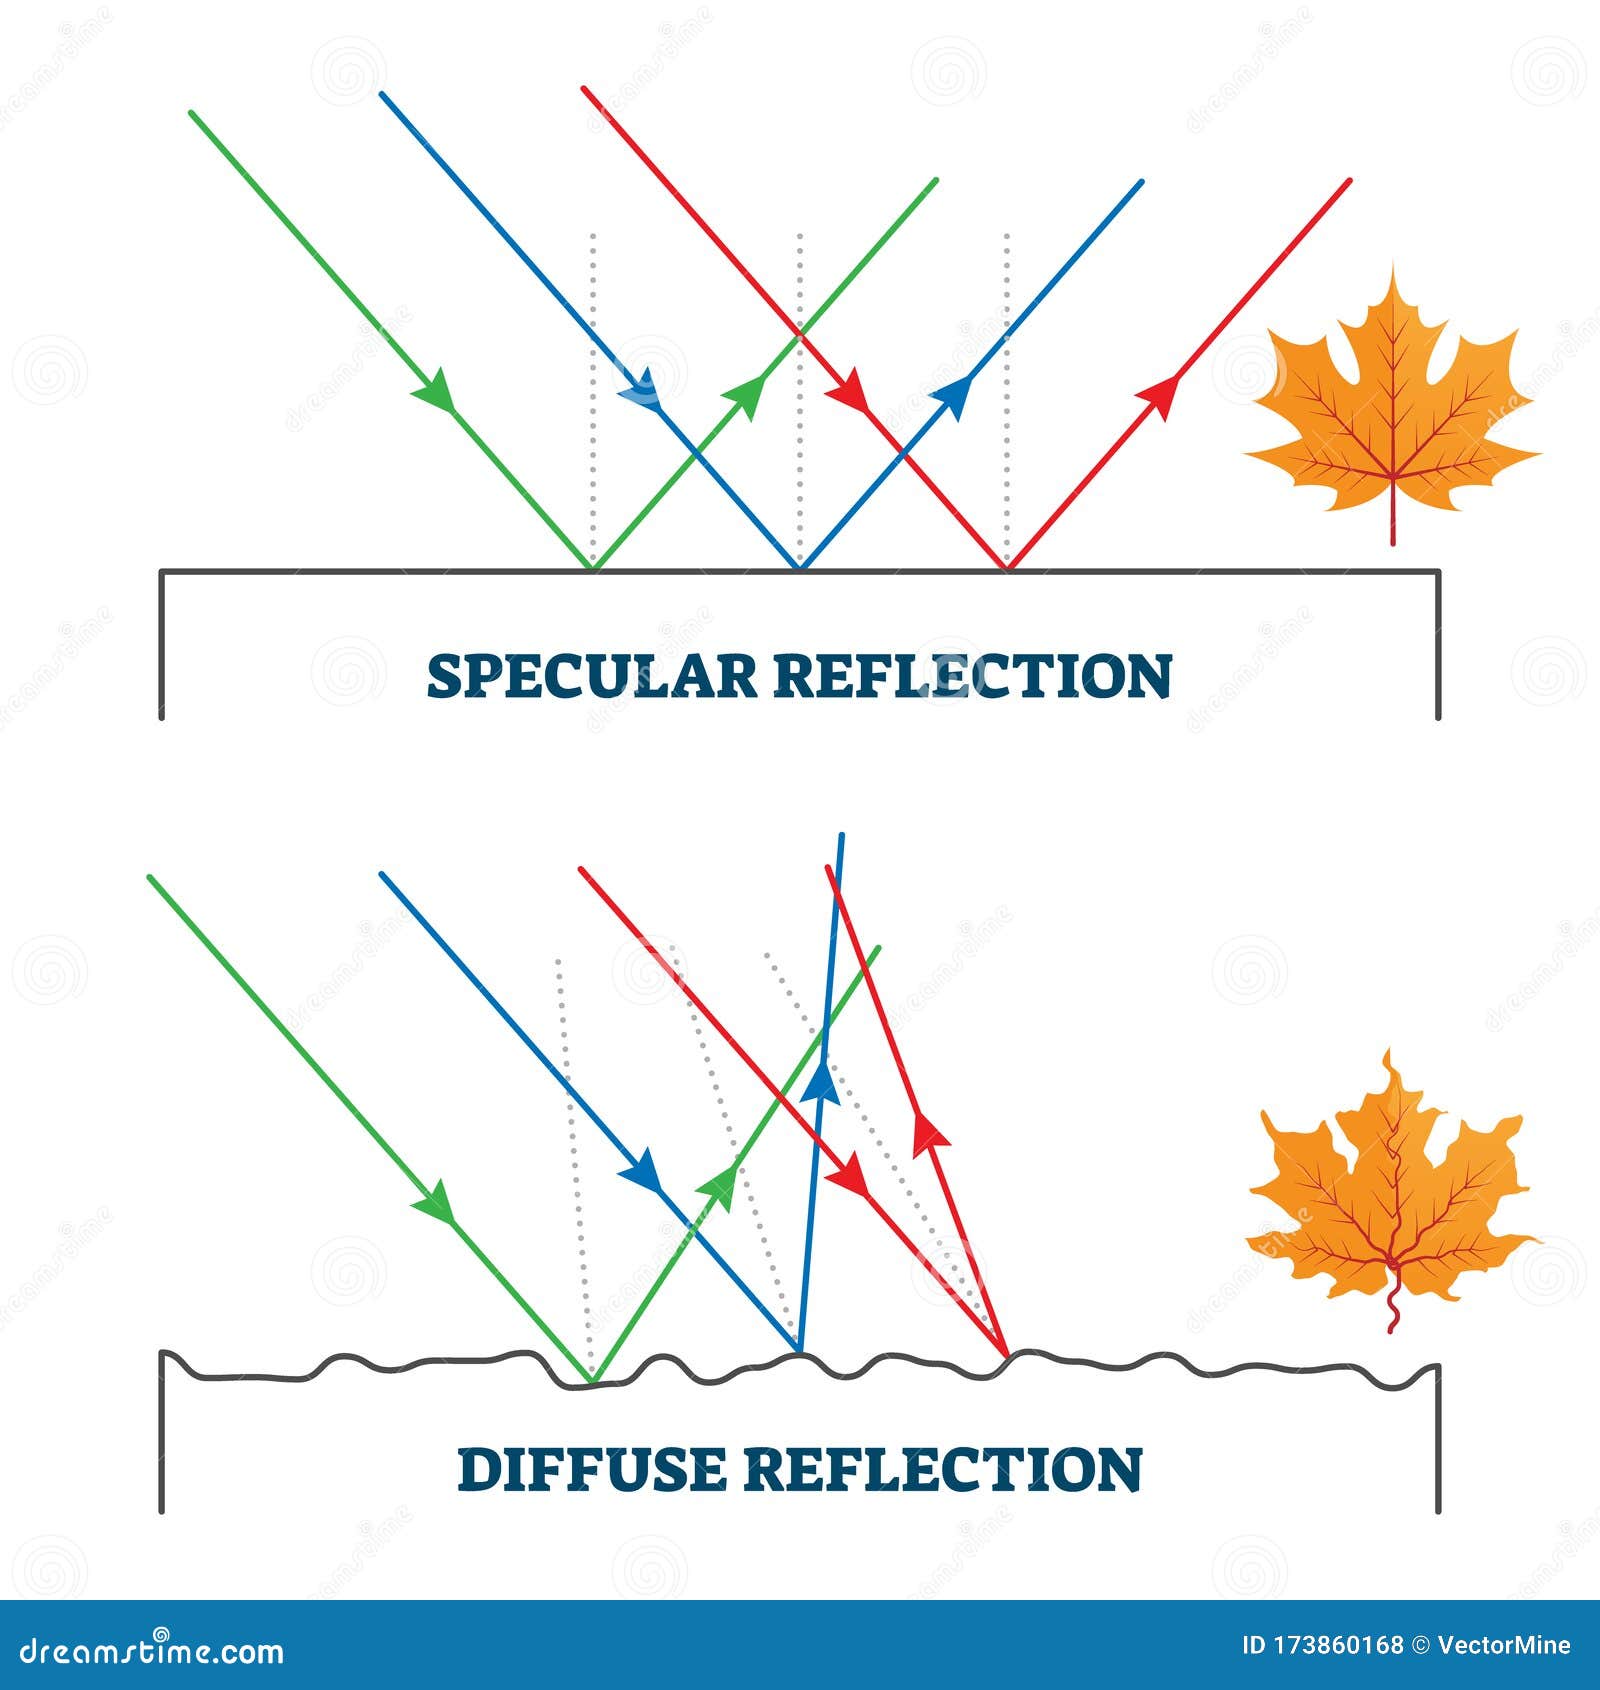 specular and diffuse reflection,   diagram